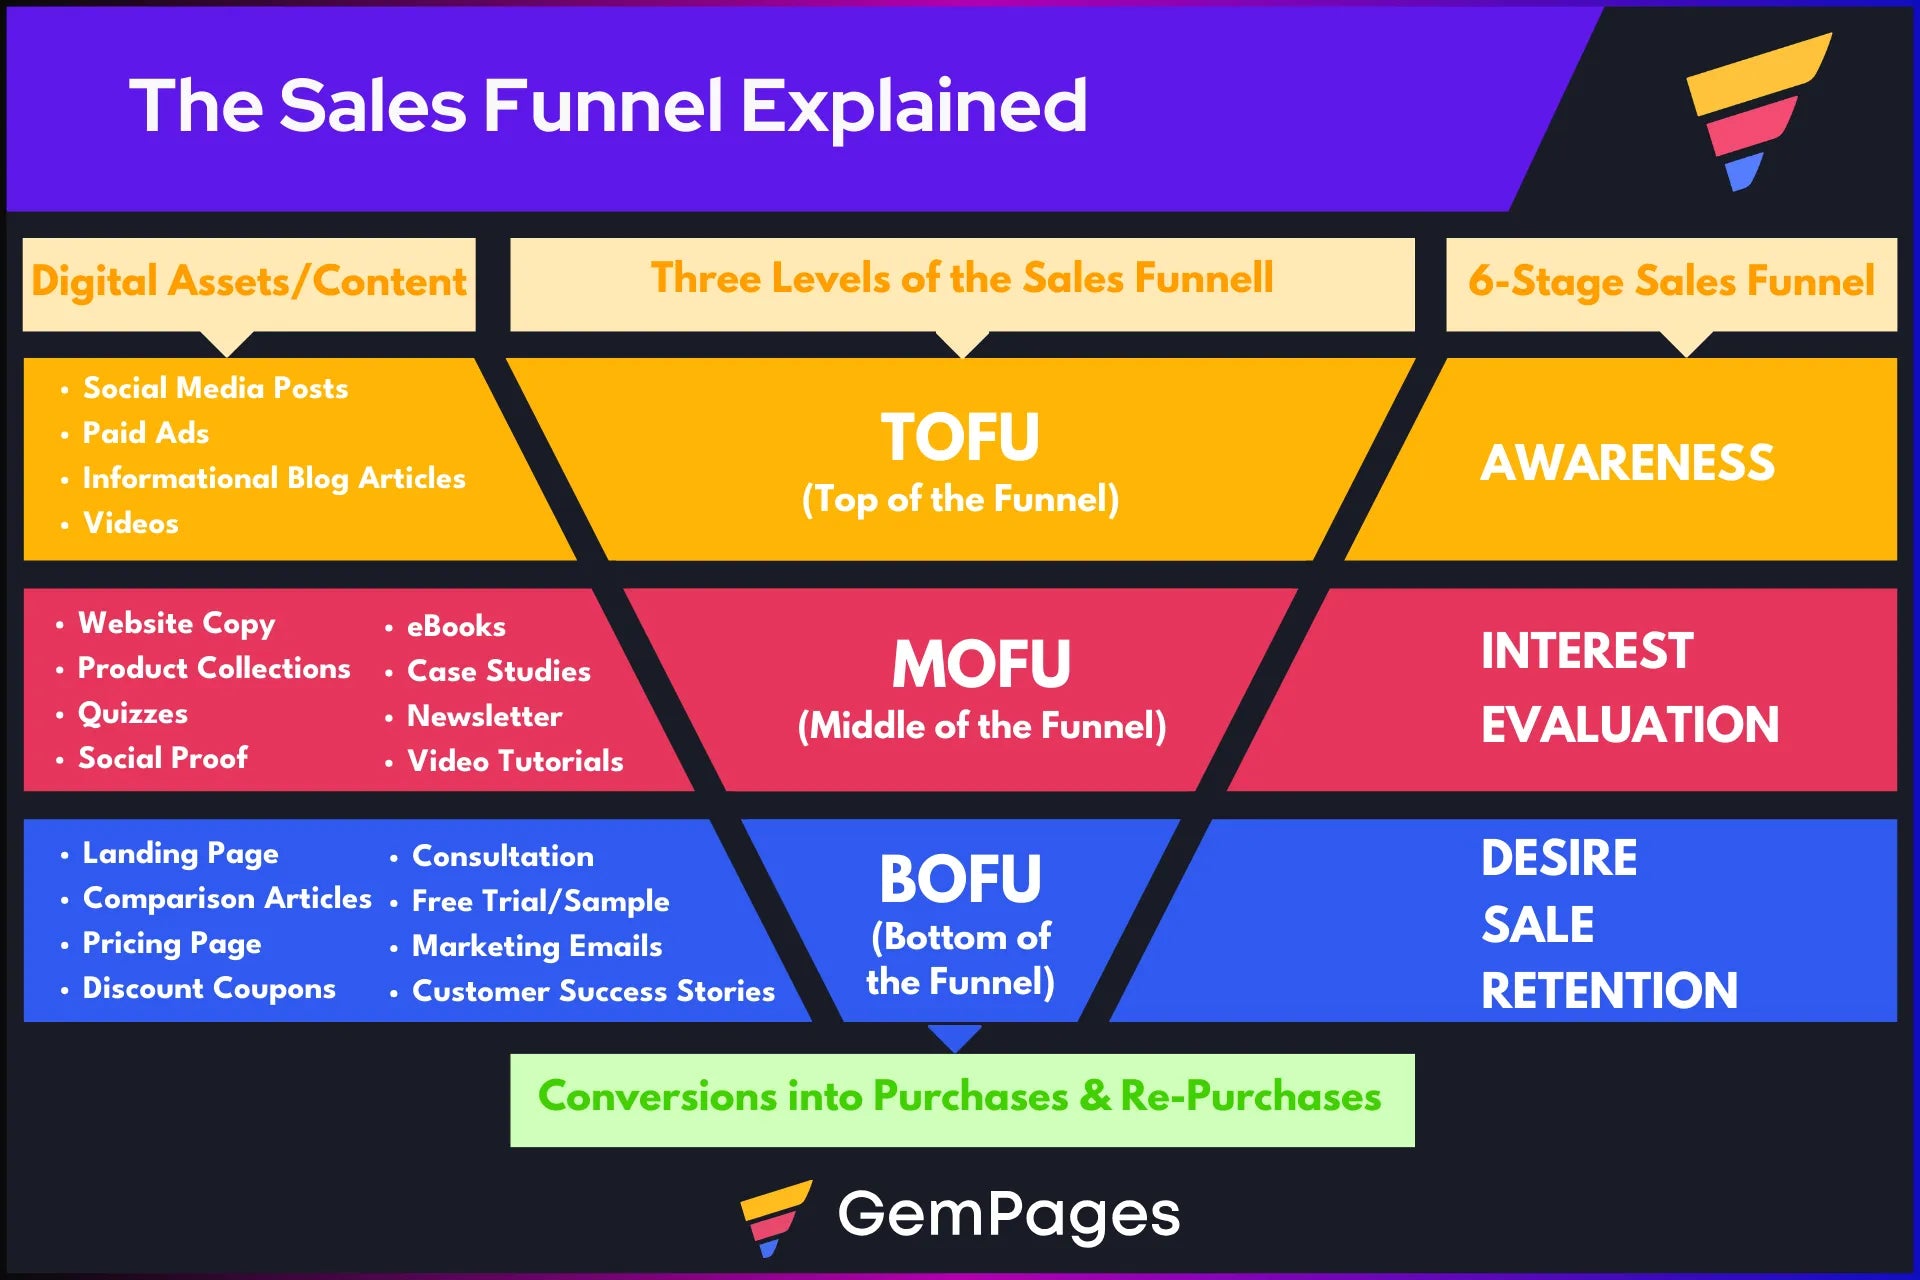 The sales funnel explained with a graphical representation